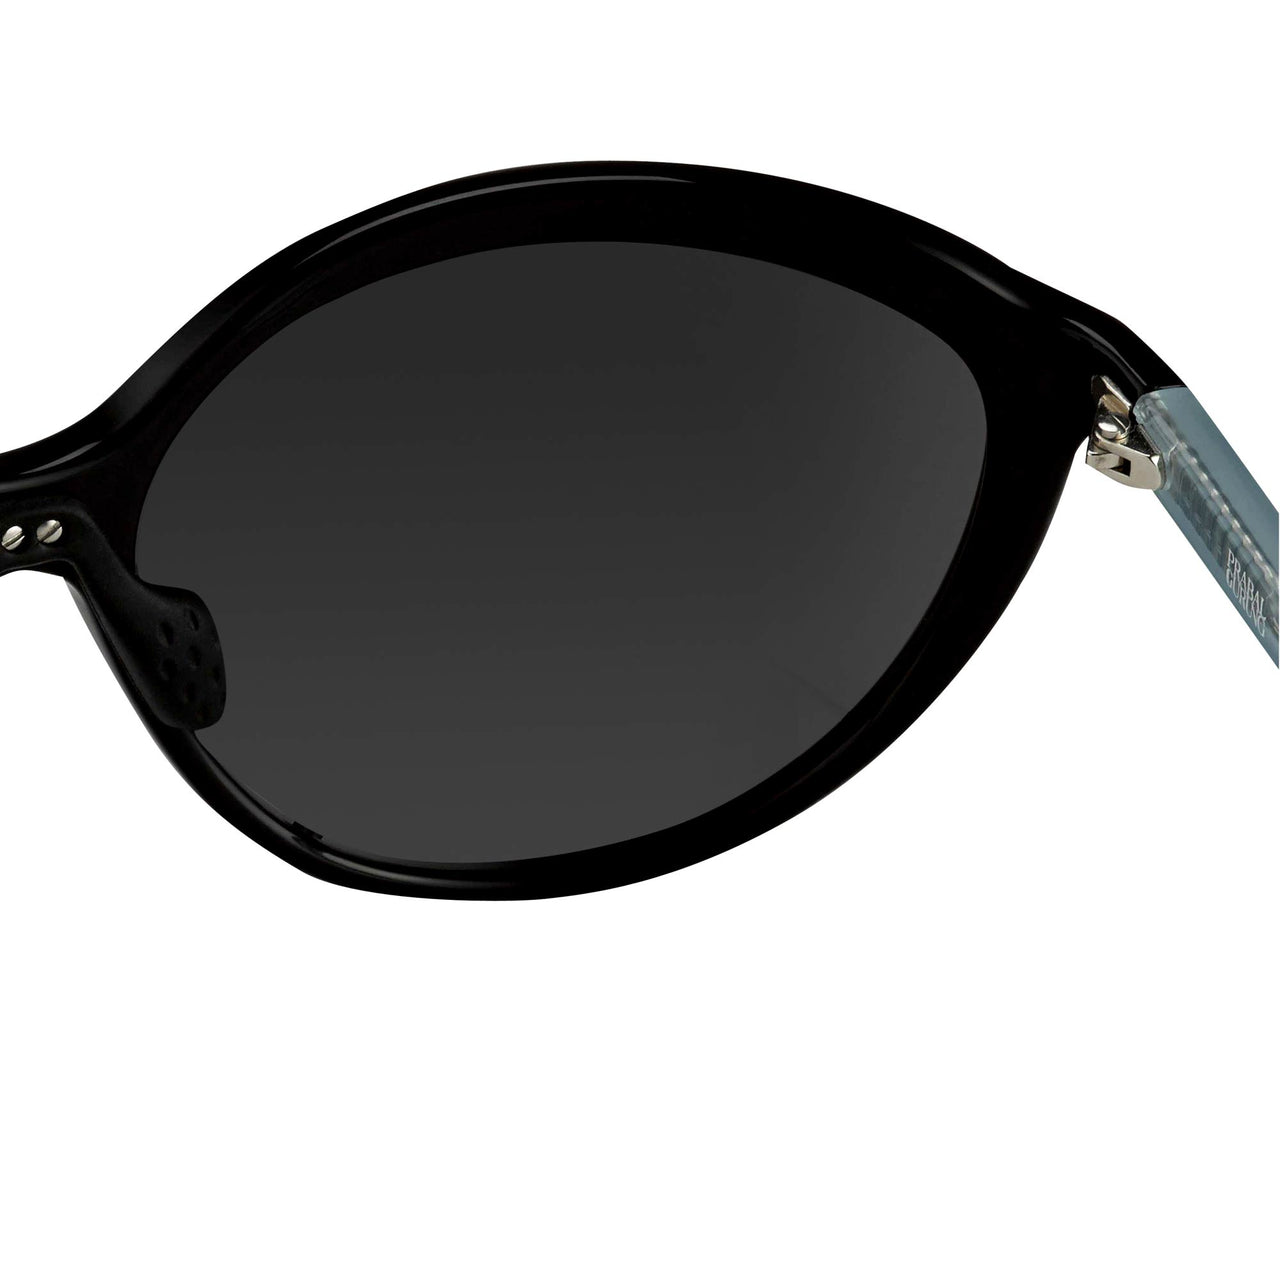 Prabal Gurung Sunglasses Female Oversized Black and Black/Teal Category 3 Silver Mirror Lenses PG22C5SUN - Watches & Crystals